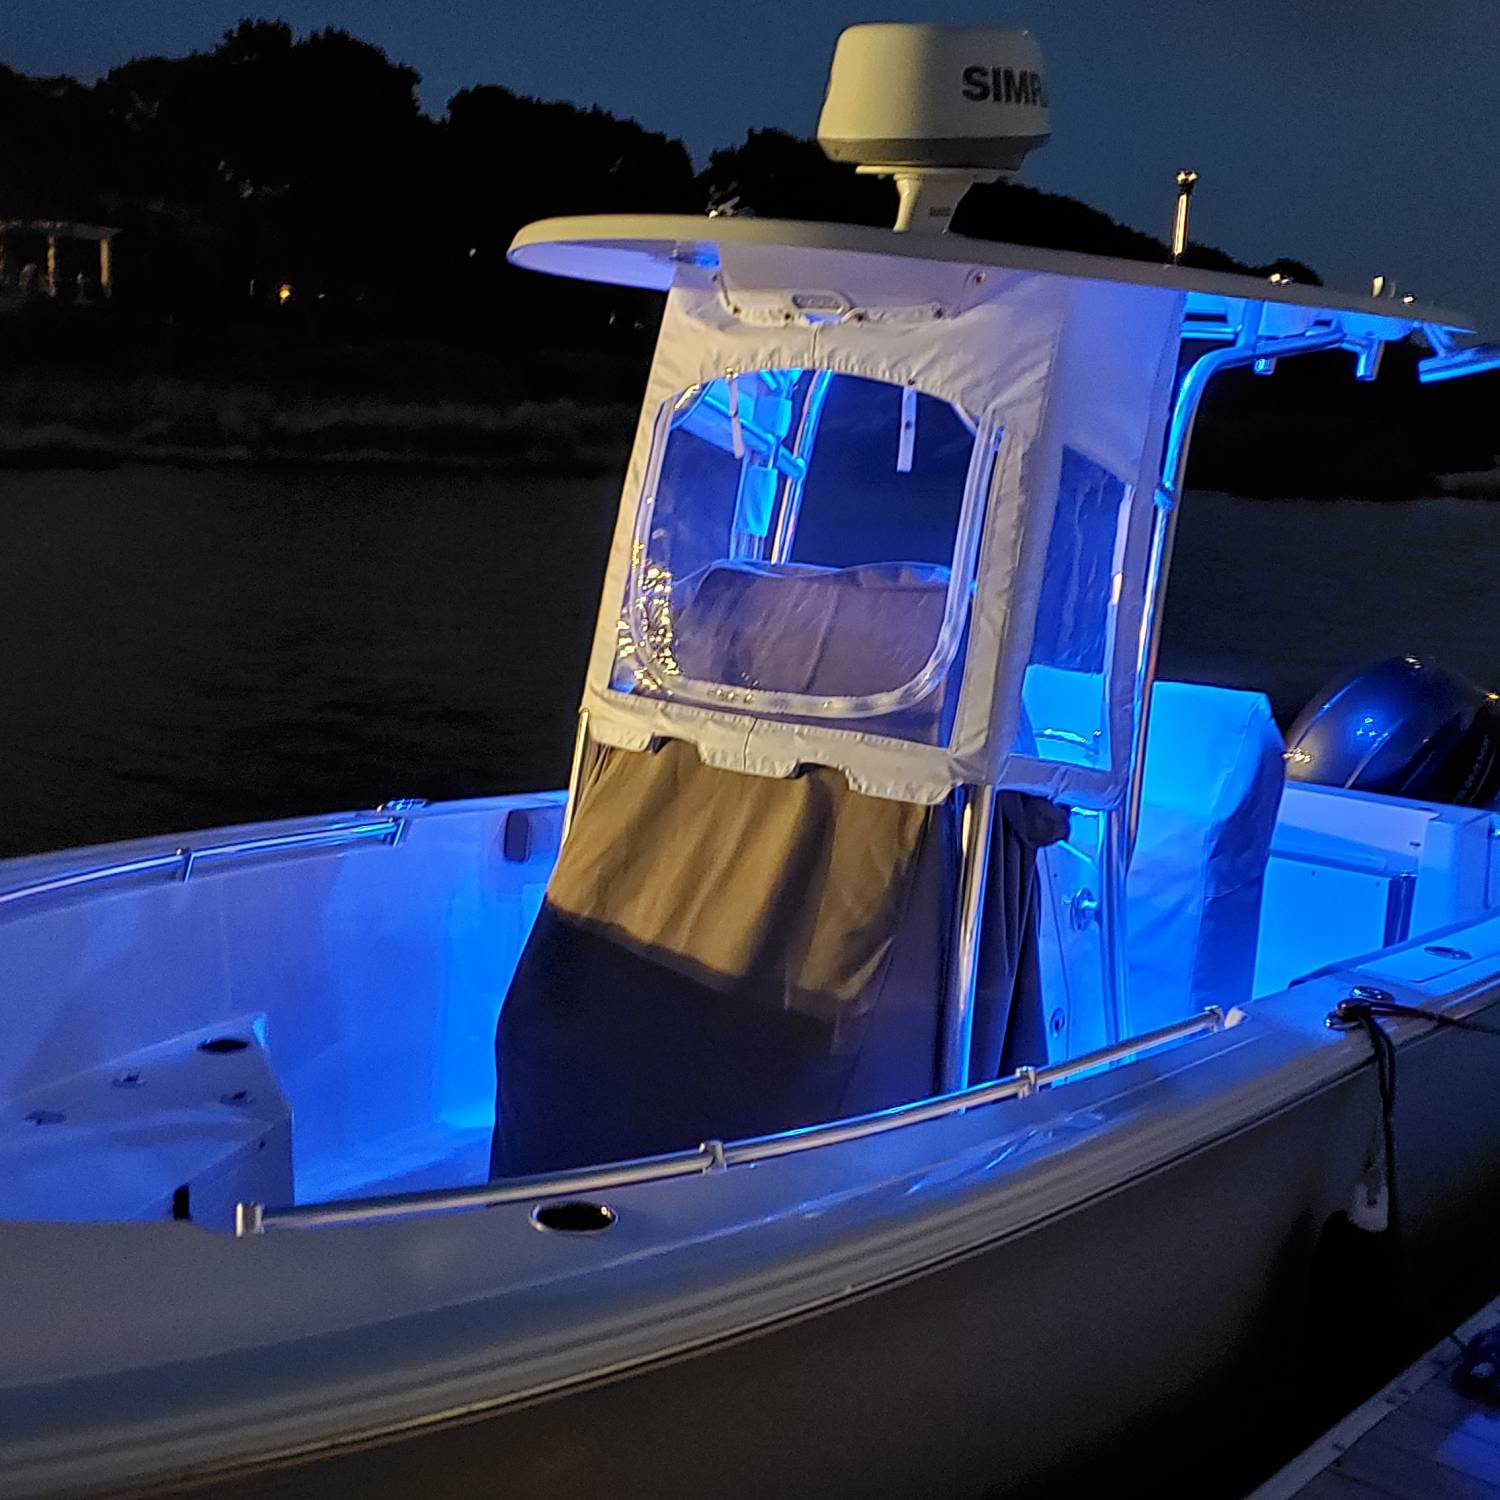 Title: Night light - On board their Sportsman Open 232 Center Console - Location: Falmouth MA.. Participating in the Photo Contest #SportsmanAugust2021